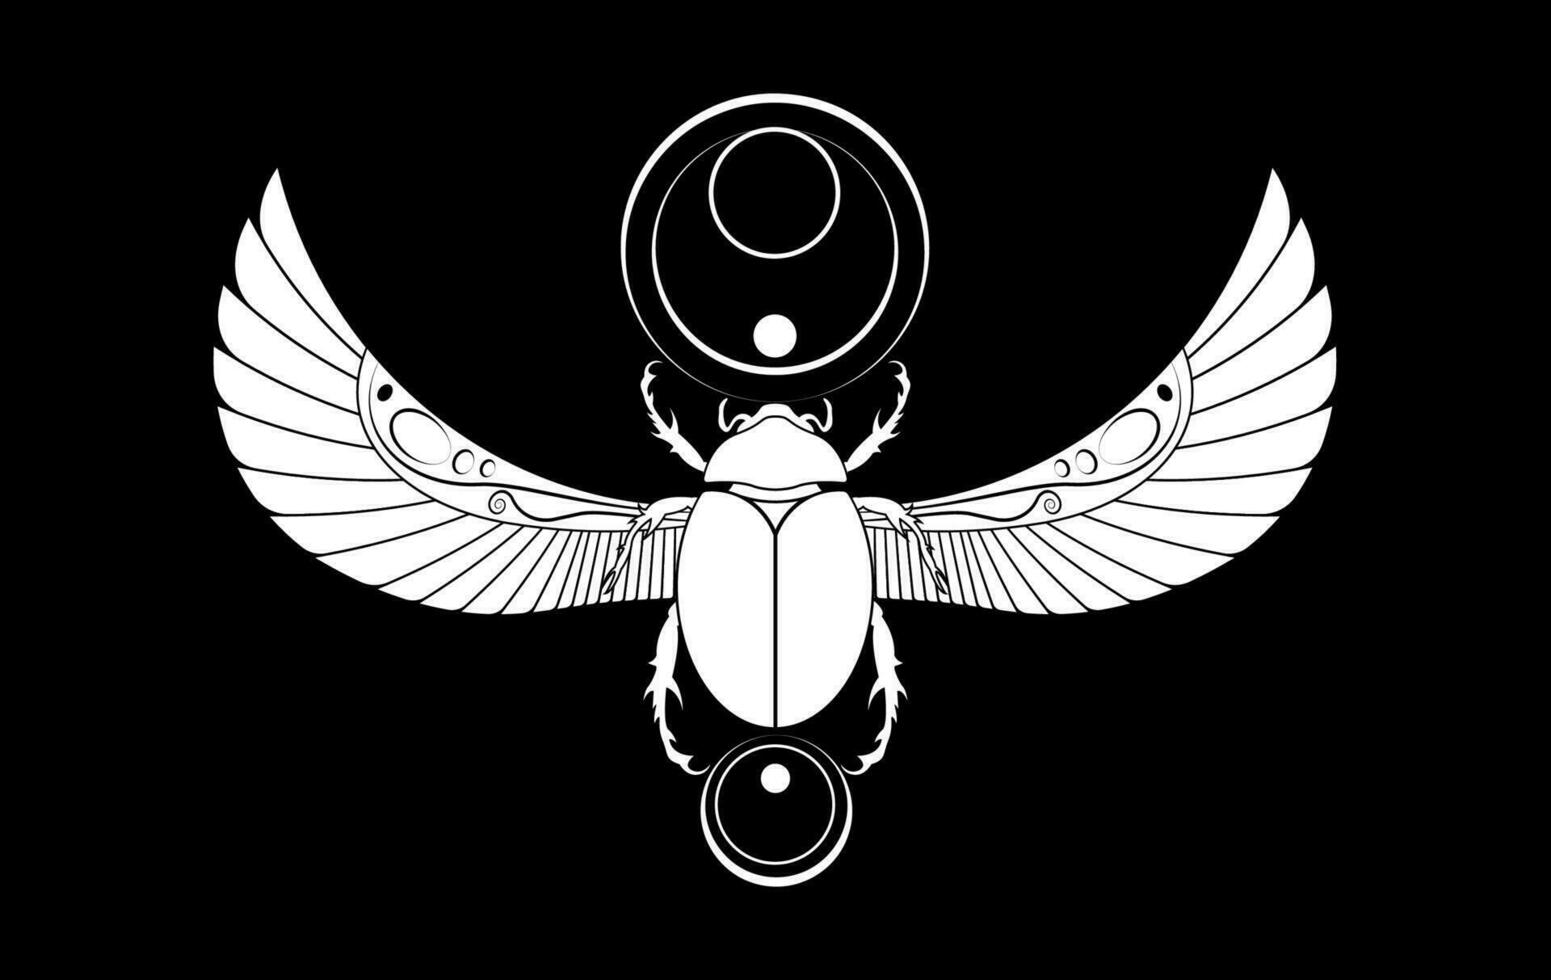 egyptian sacred Scarab wall art design. beetle with wings. Vector illustration white logo, personifying the god Khepri. Symbol of the ancient Egyptians. To be colored isolated on black background